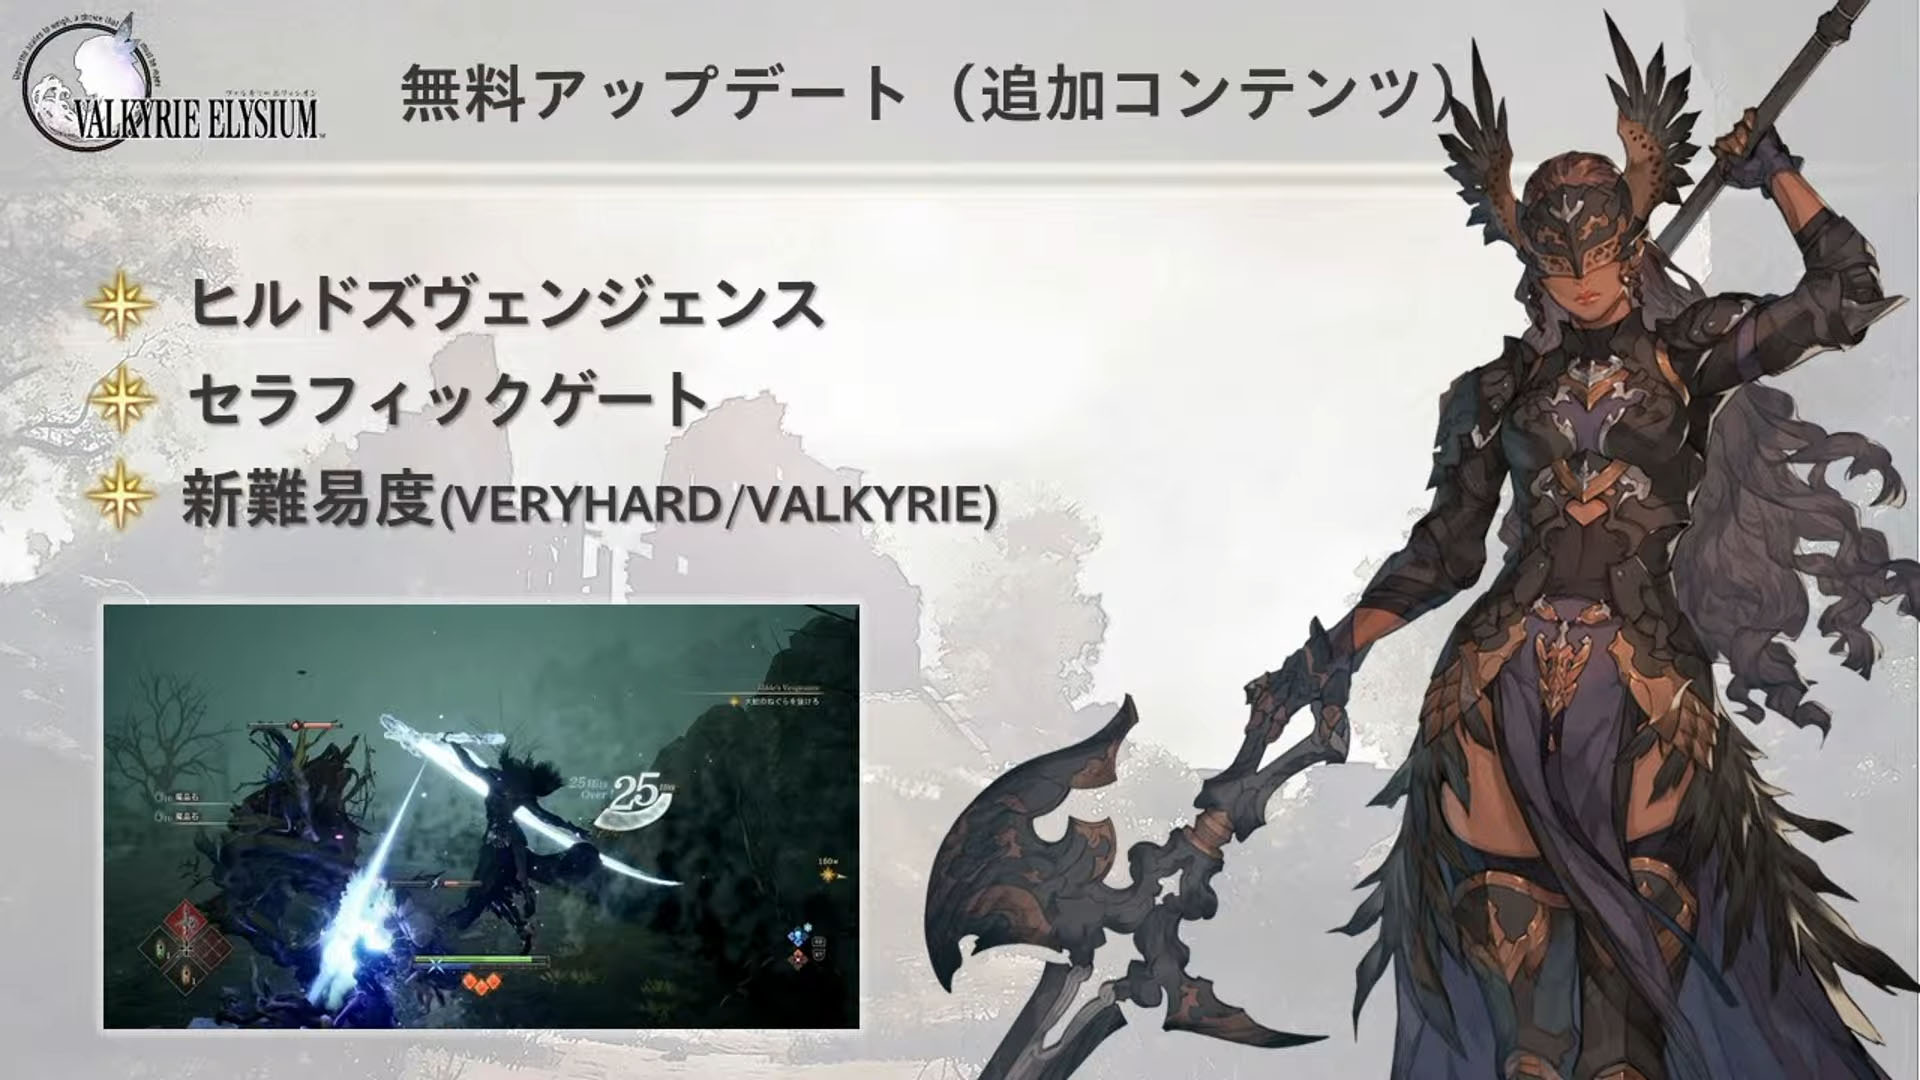 #
      Valkyrie Elysium – early November update to add ‘Hilde’s Vengeance’ mode, time attack, and high difficulty settings